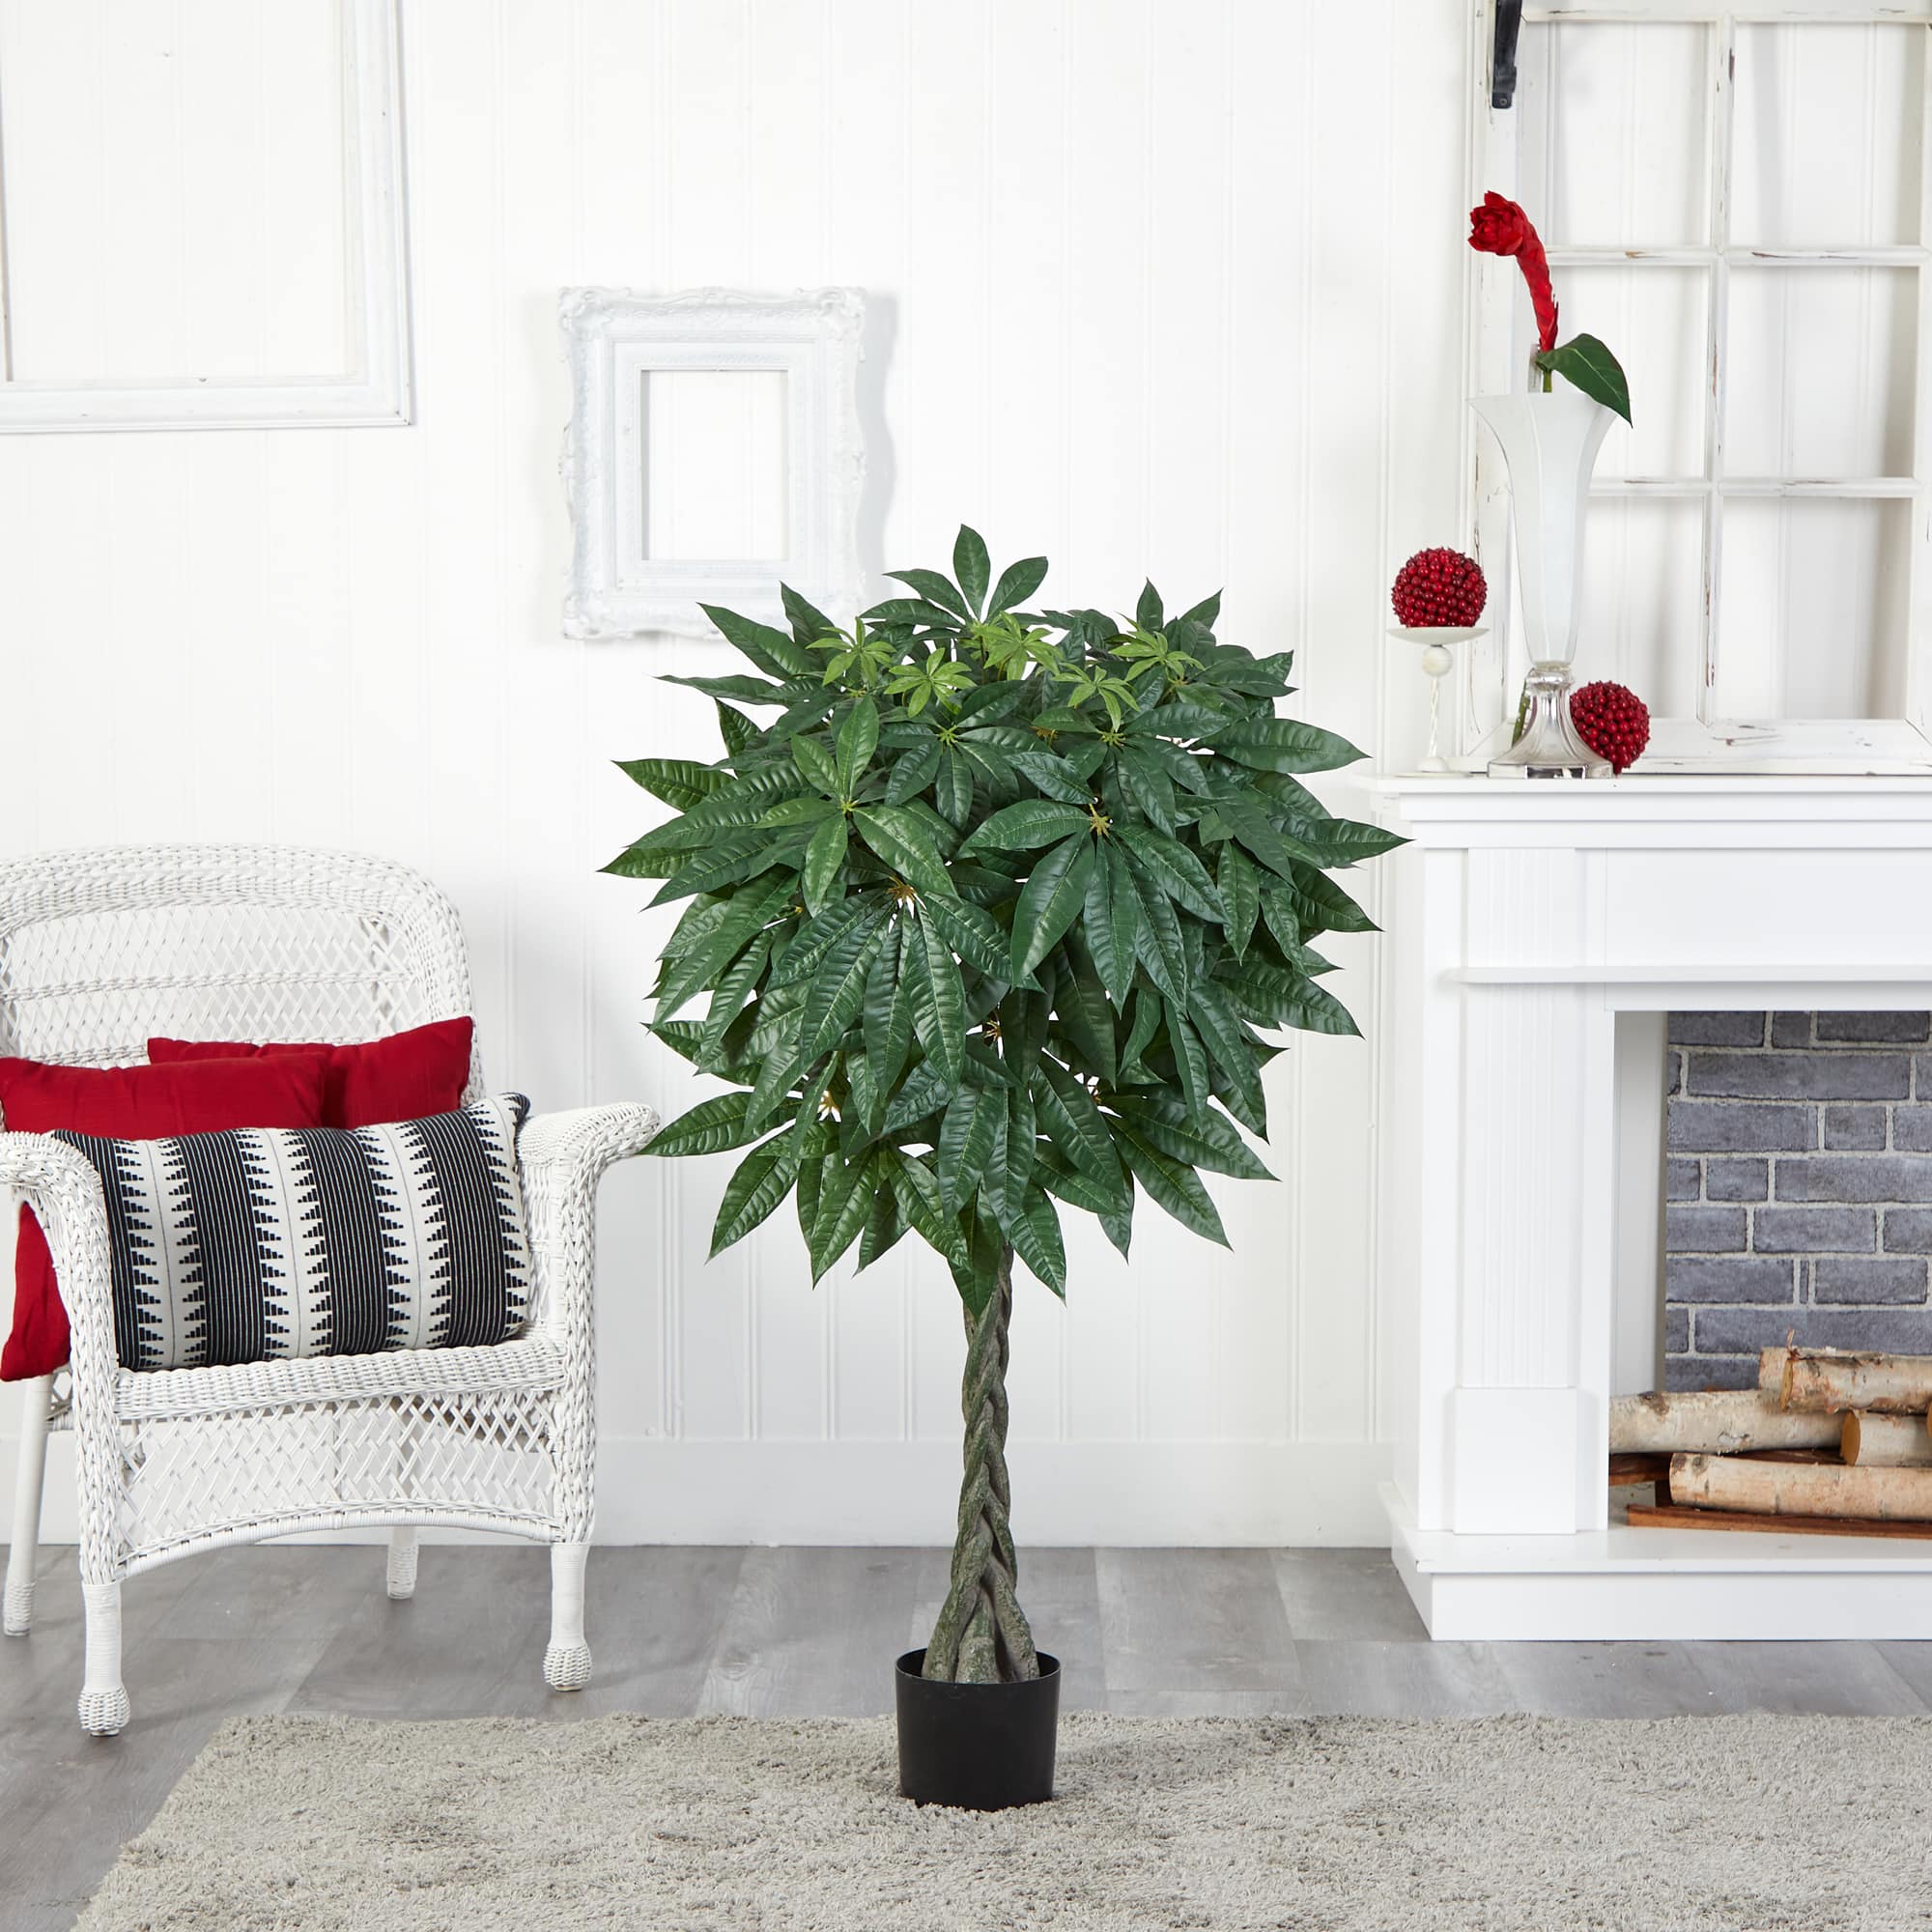 4ft. Potted Braided Money Tree